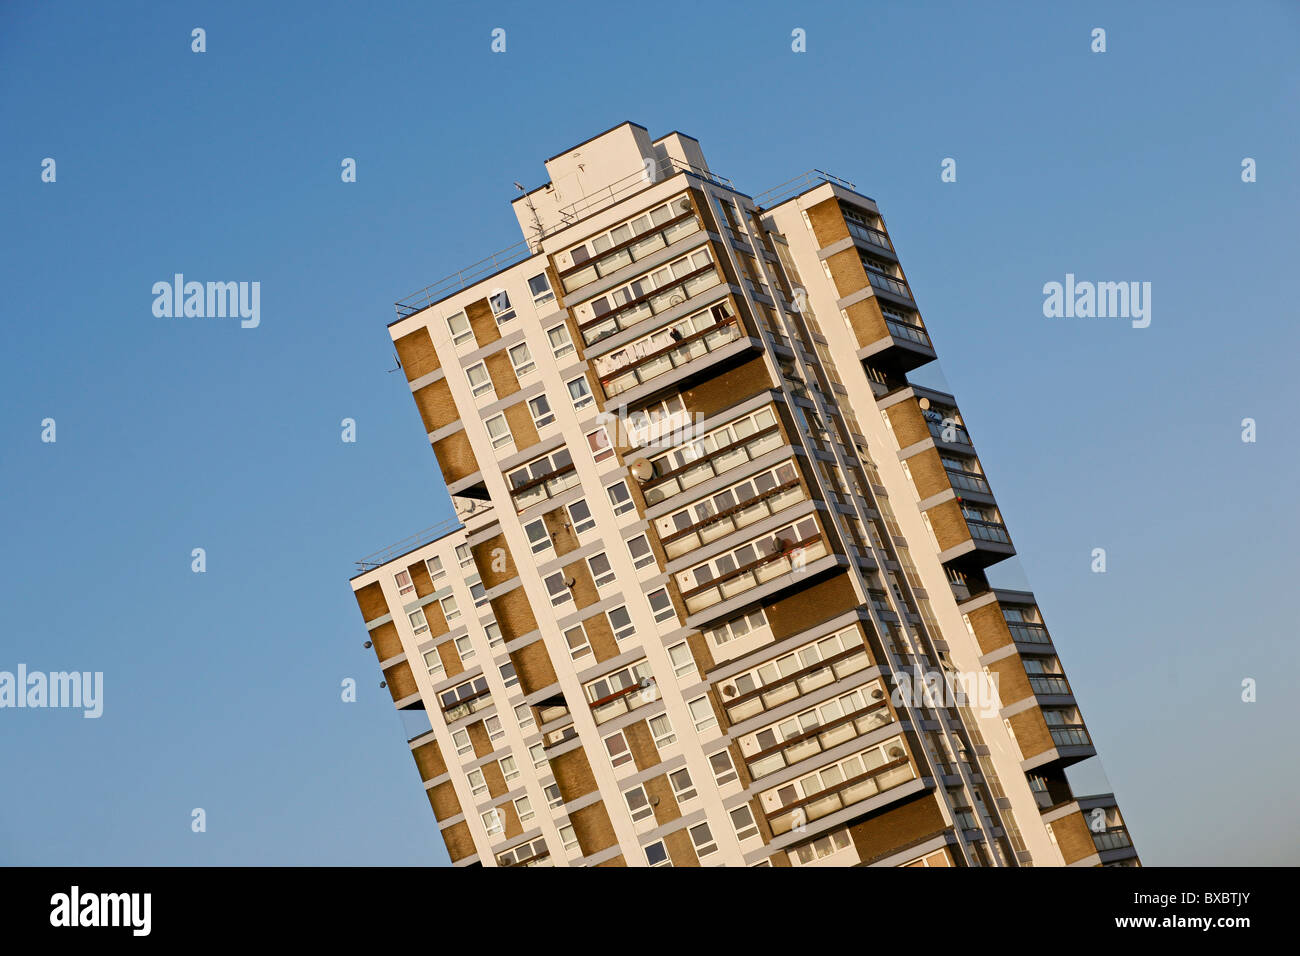 Tower block in Wandsworth, London, England Stock Photo